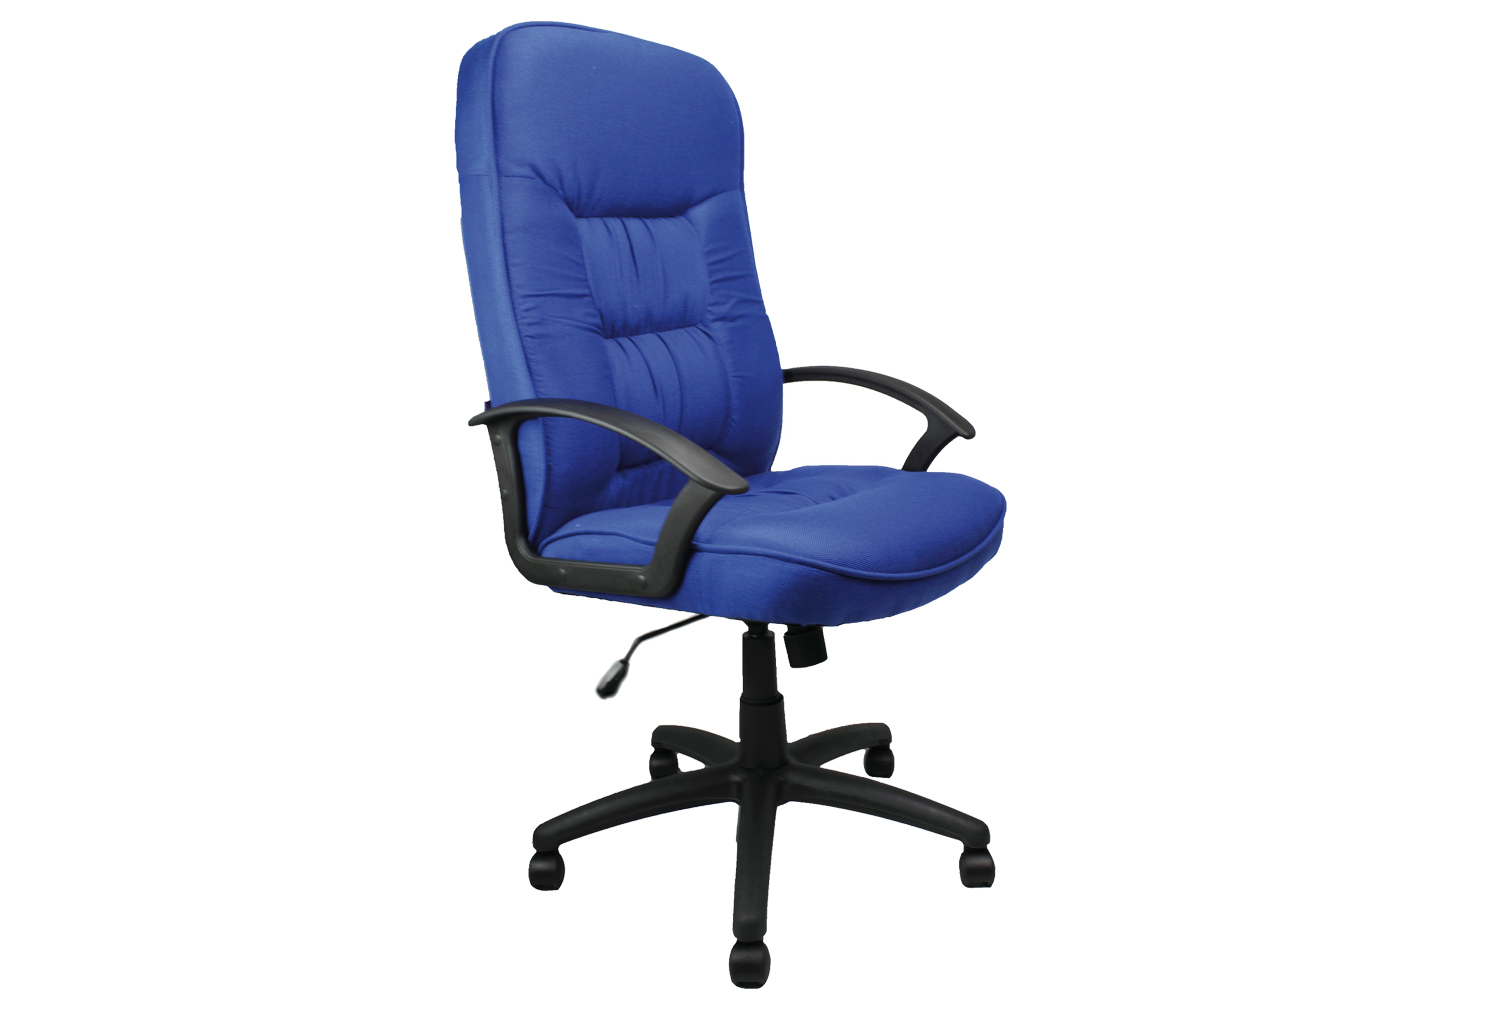 Nero High Back Fabric Executive Office Chair (Blue), Express Delivery